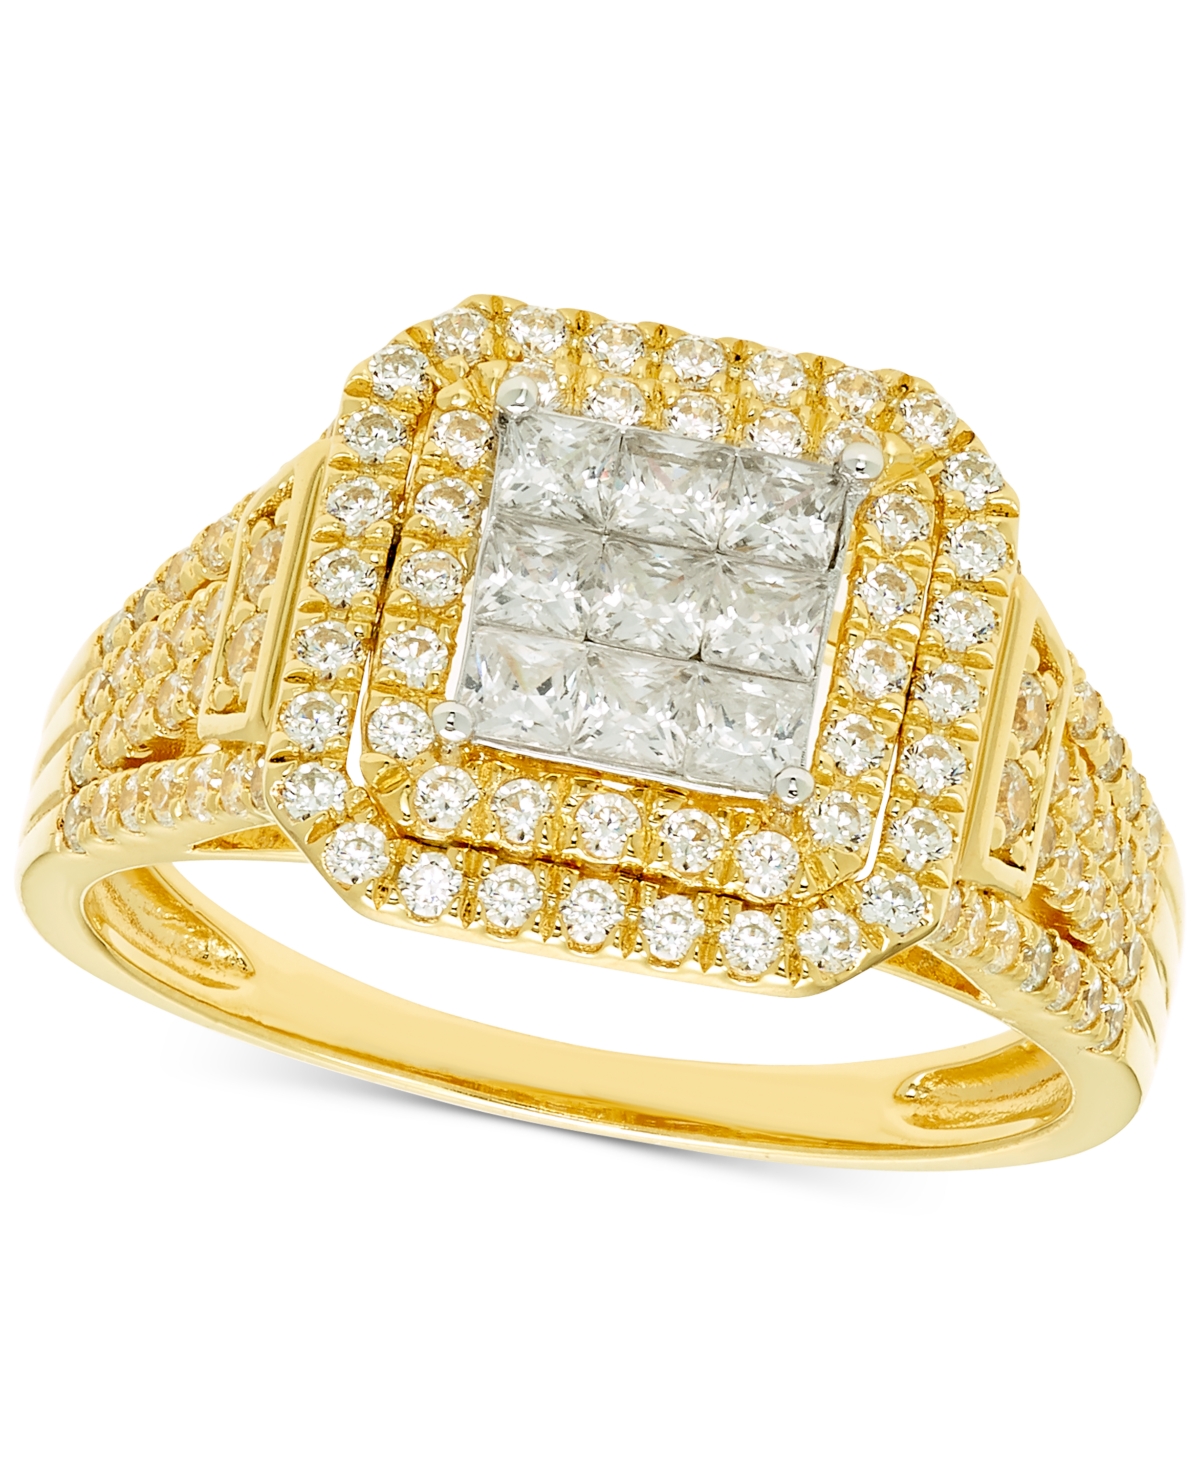 Diamond Square Halo Cluster Engagement Ring (1 ct. t.w.) in 14k Gold - Yellow Gold